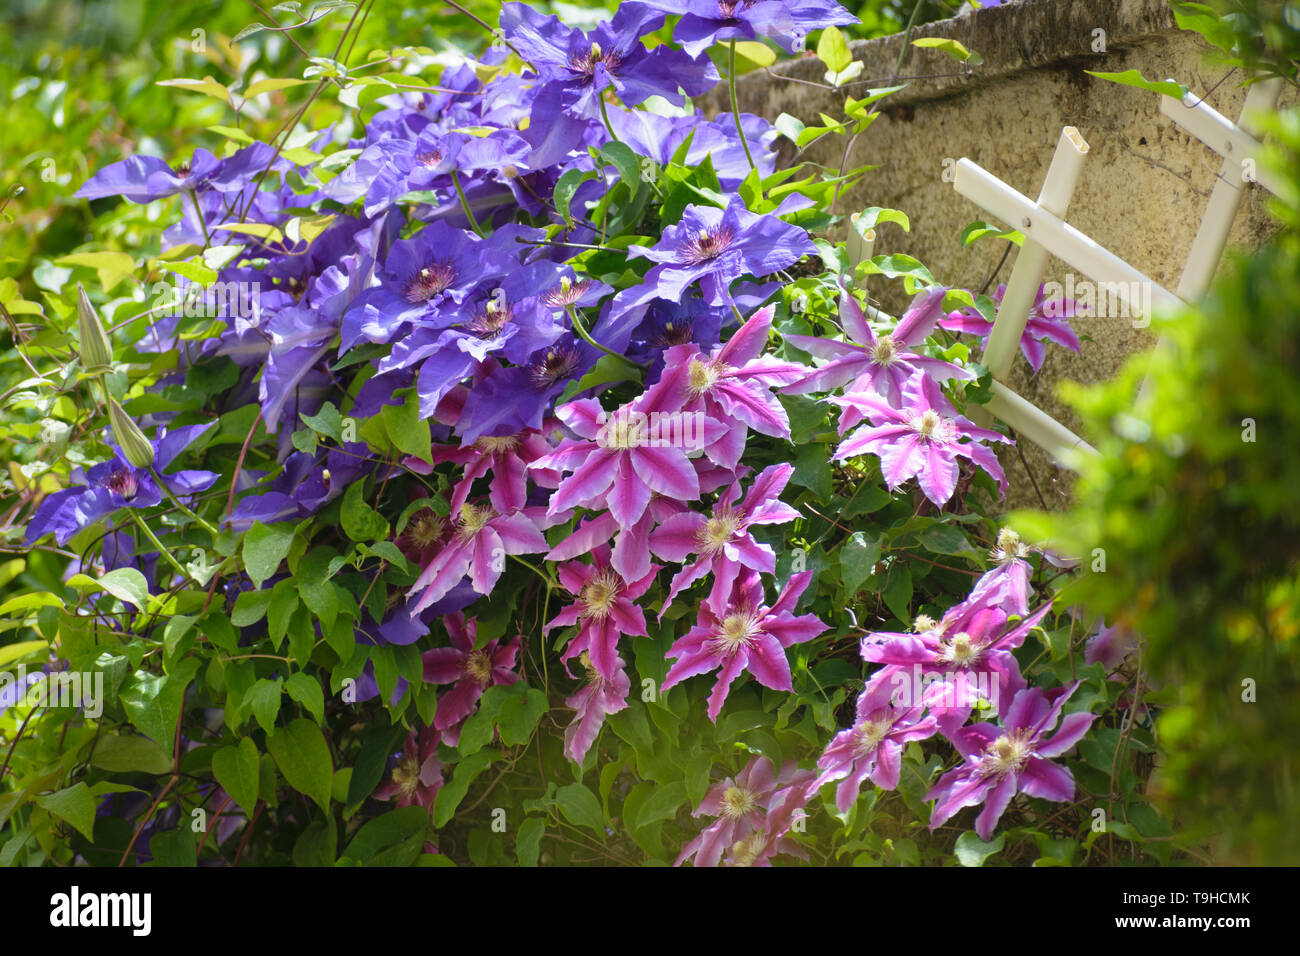 Beautiful pink and purple Clematis flowers in house garden Stock Photo